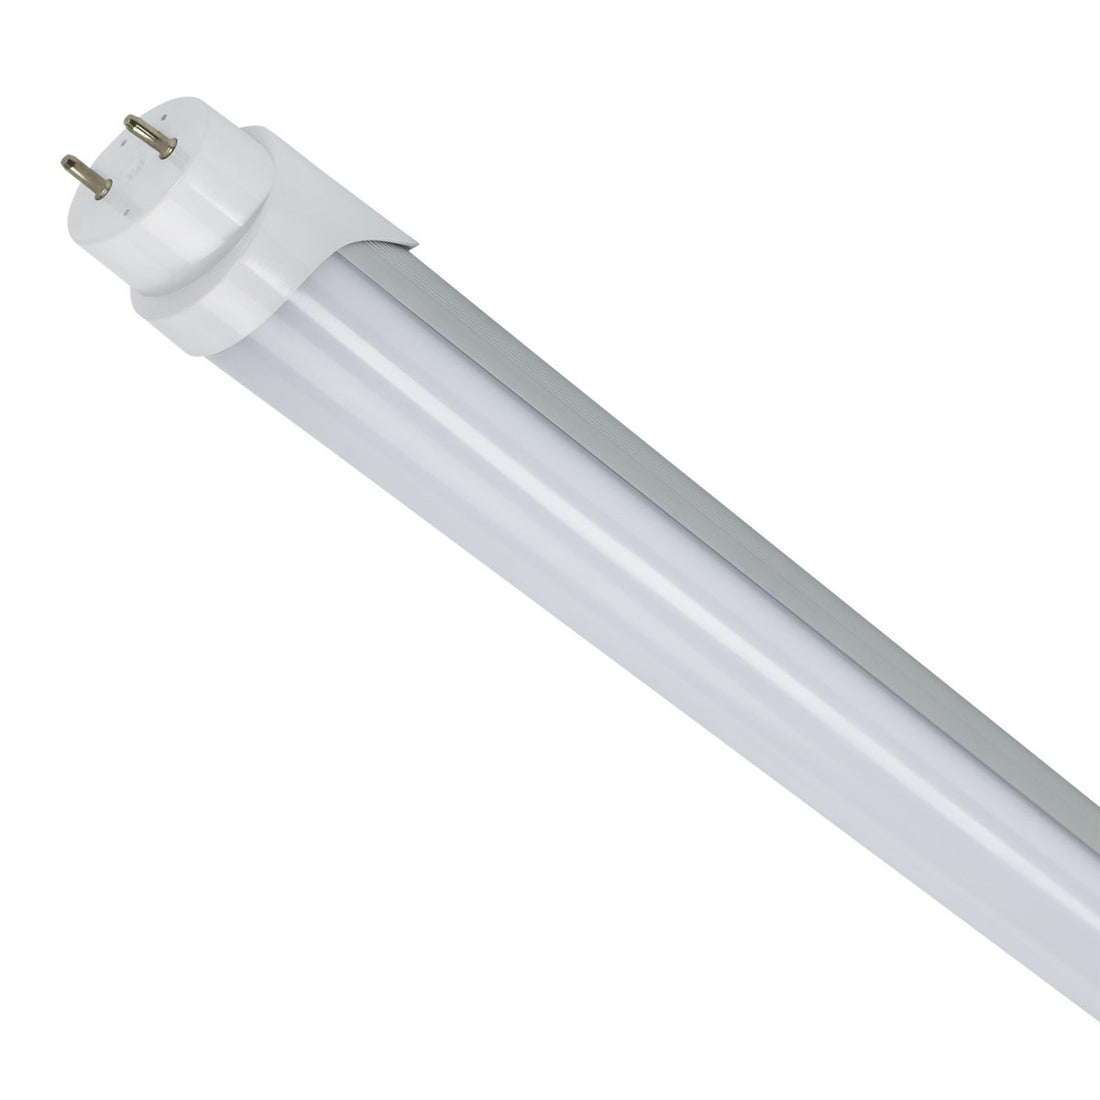 attage-Tunable 4ft LED Tube - 15W/12W/10W, 4000K, 100-277VAC Input, Switch Dimming, 140¬∞ Beam Angle, Frosted Lens, Circular Aluminum Housing, Two-End Input - 42 Pack